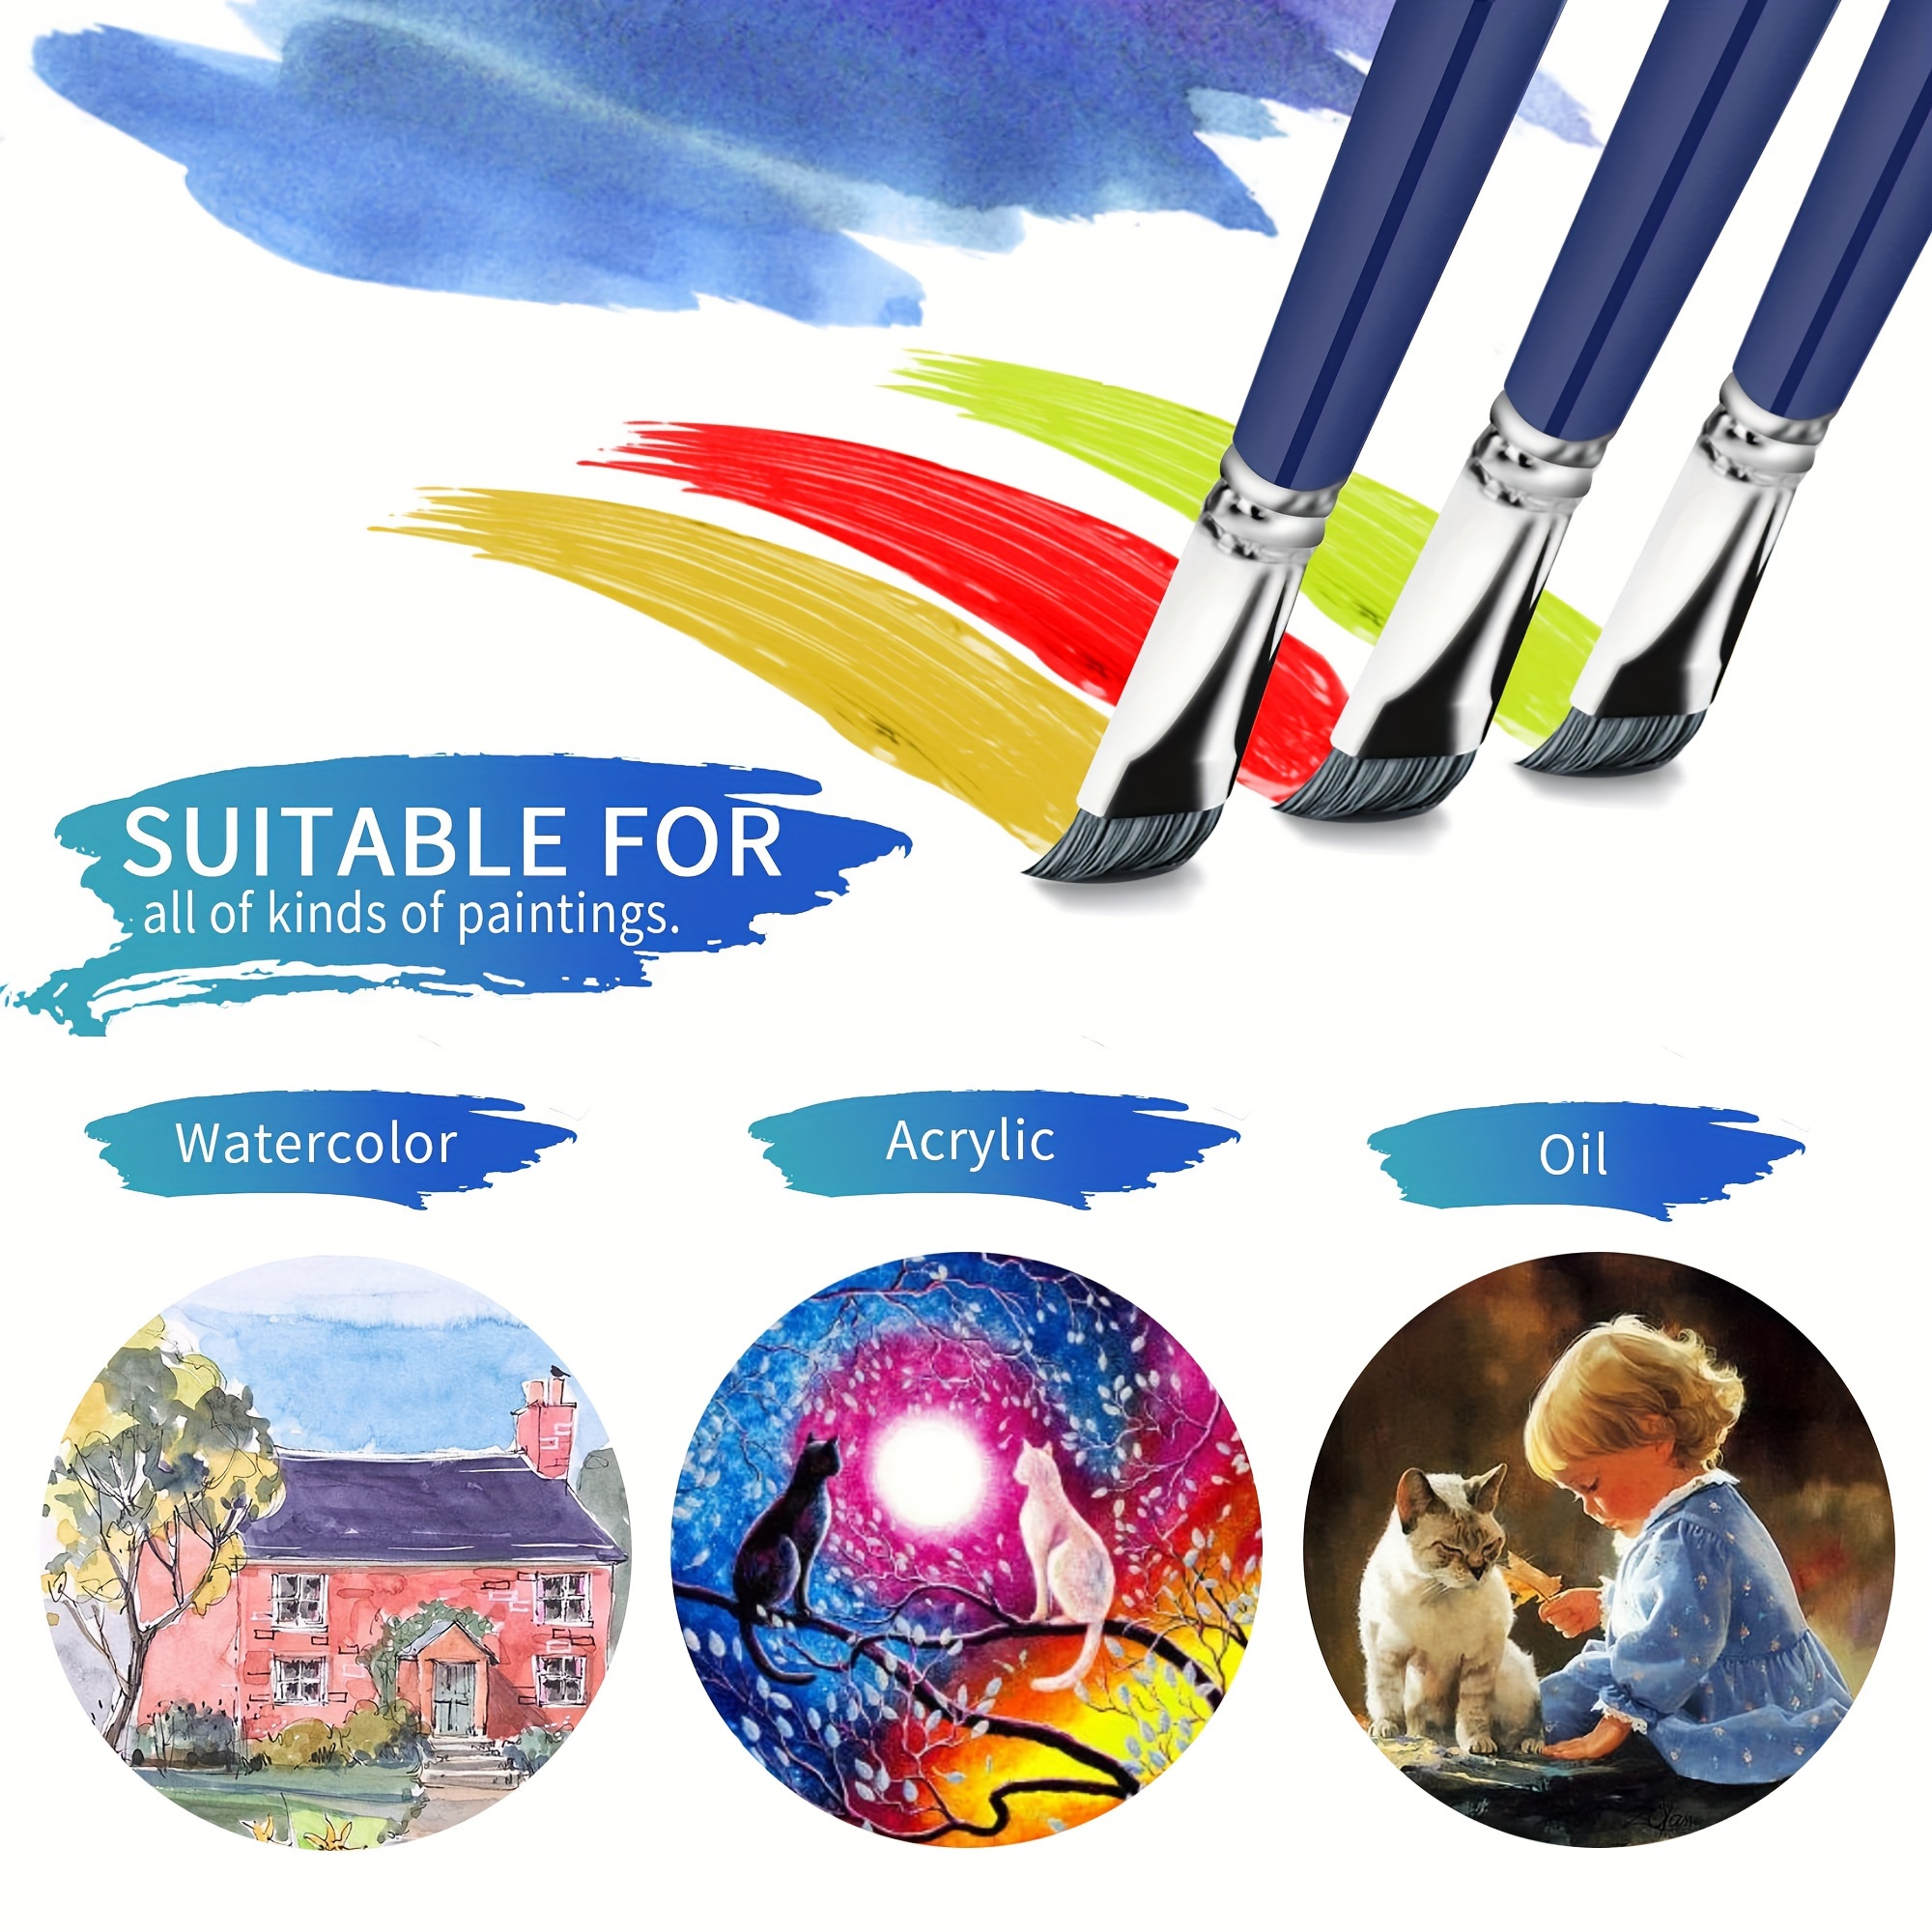 6pcs Artist Paint Brush Set Soft Nylon Tips Painting Brushes For Canvas,  Watercolor & Fabric - For Beginners And Professionals